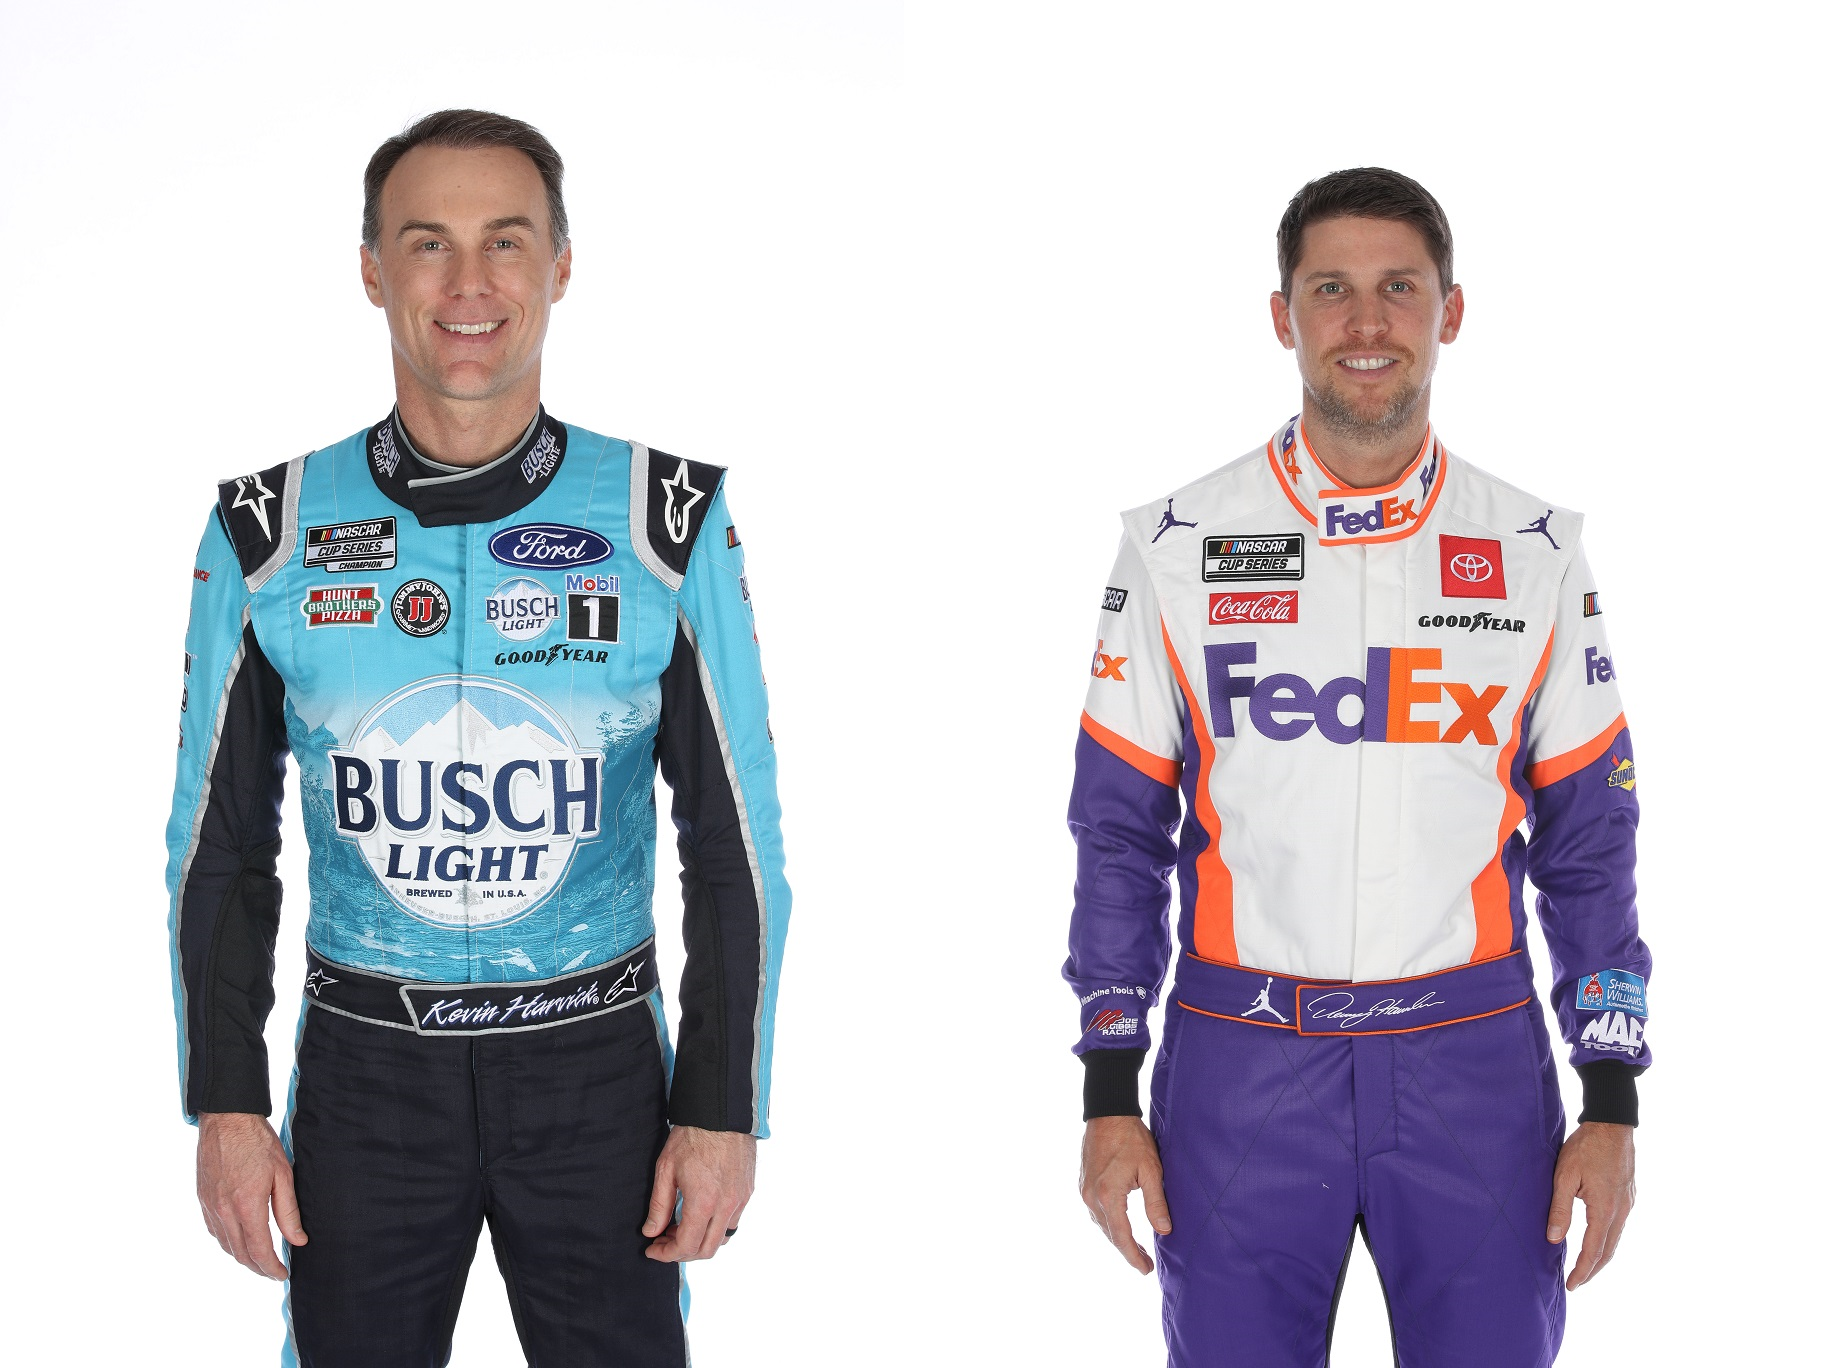 Without a doubt, Kevin Harvick and Denny Hamlin are head of the class.